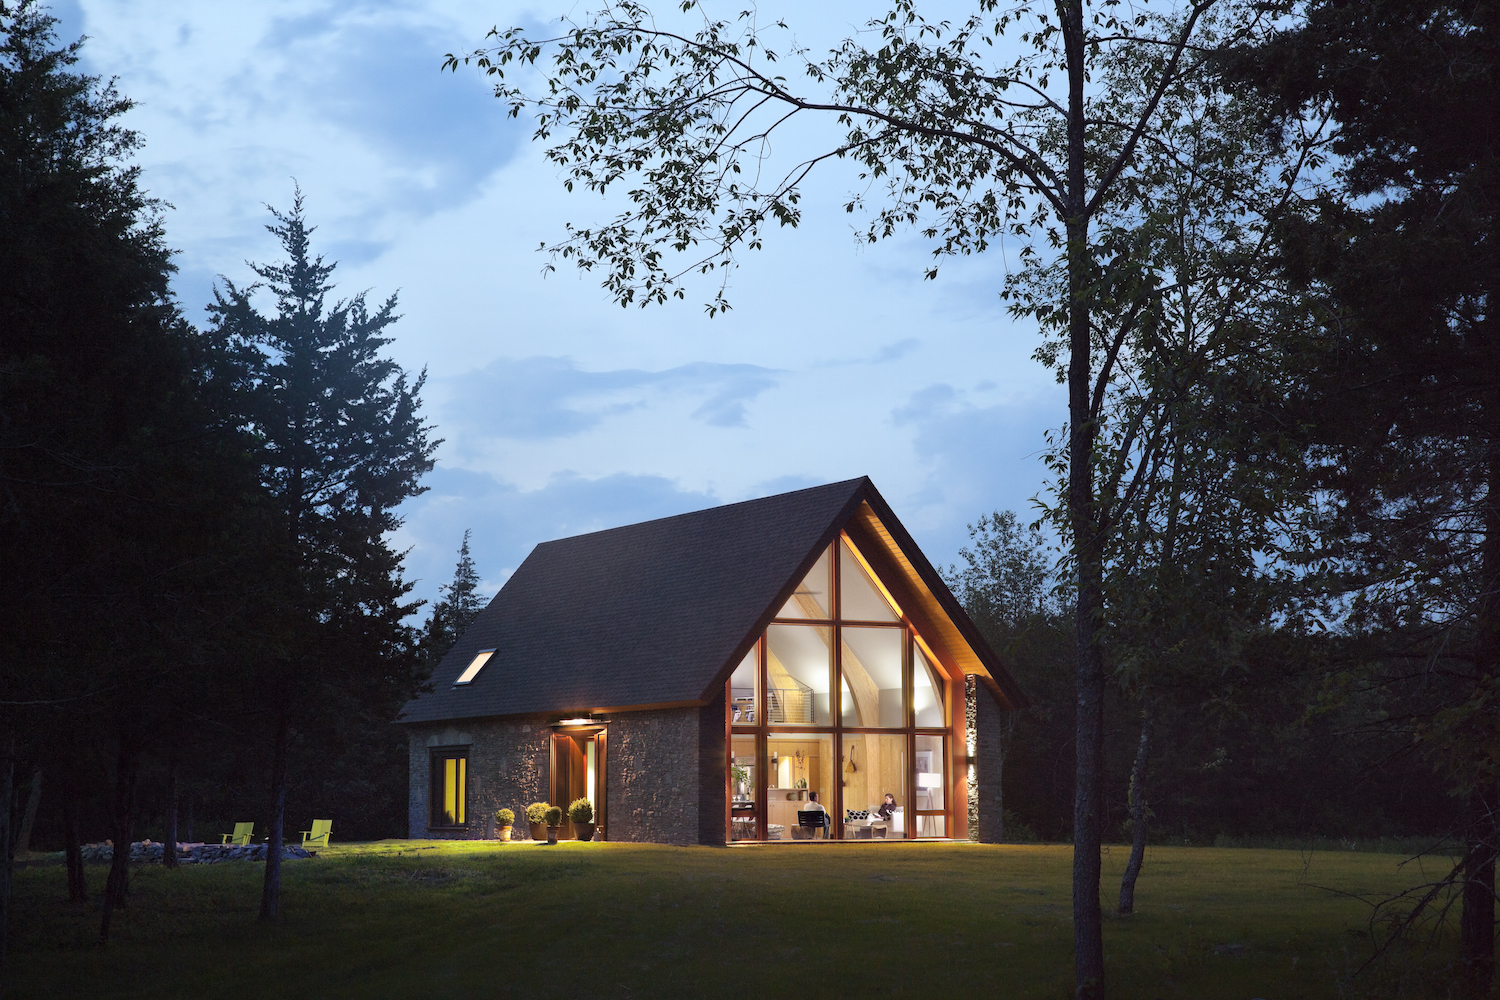 Hudson Passive House; A residence that will achieve near zero energy consumption without the use of solar panels, wind turbines or other site energy systems; Location: Hudson NY, Architect: Dennis Wedlick Architect. Image by: Peter Aaron